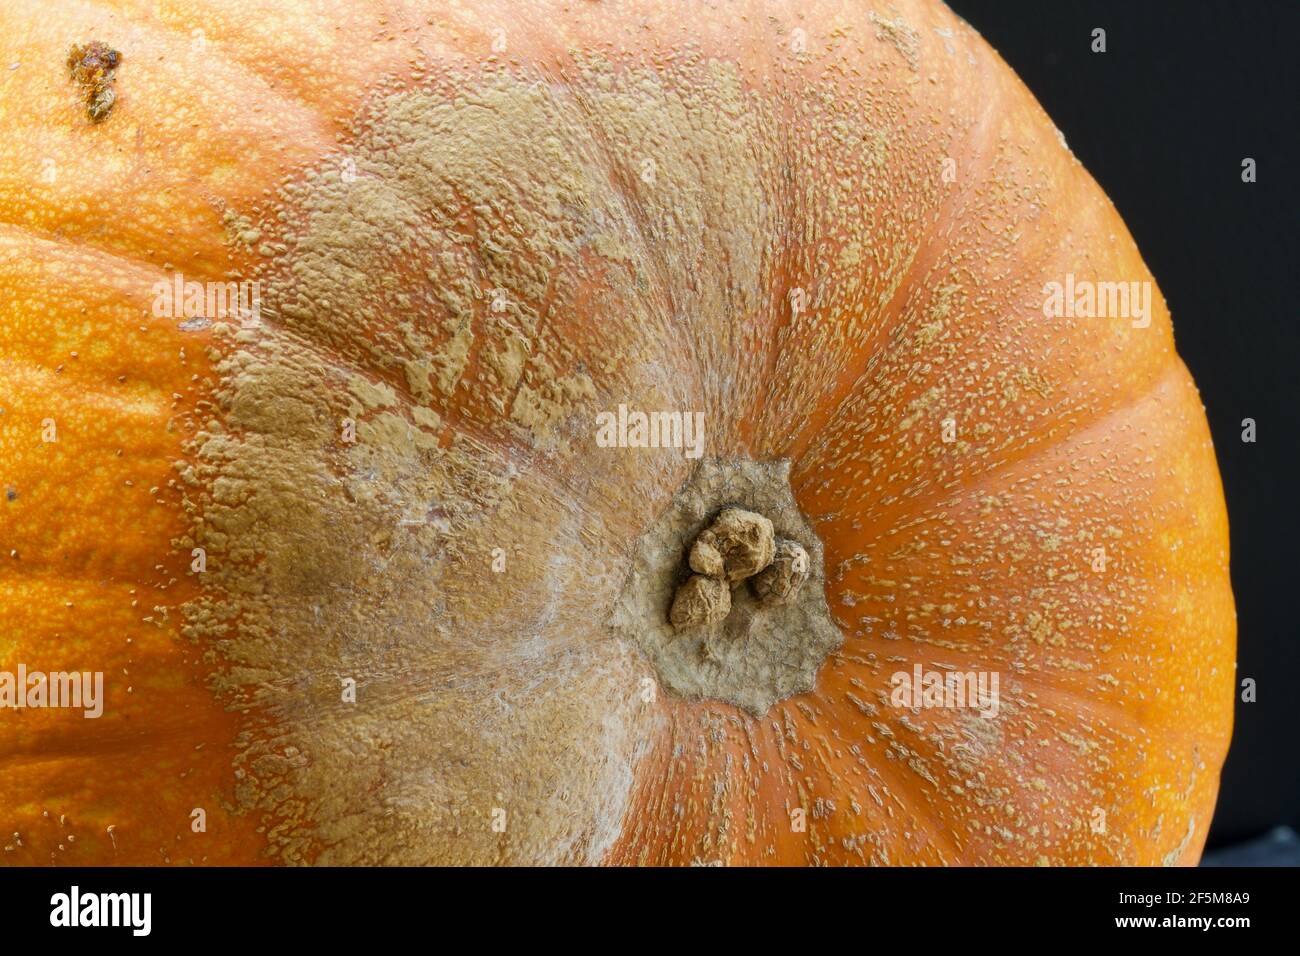 A close up photo of a bright orange pumpkin with early stages of fungal damage (grey mold). Stock Photo